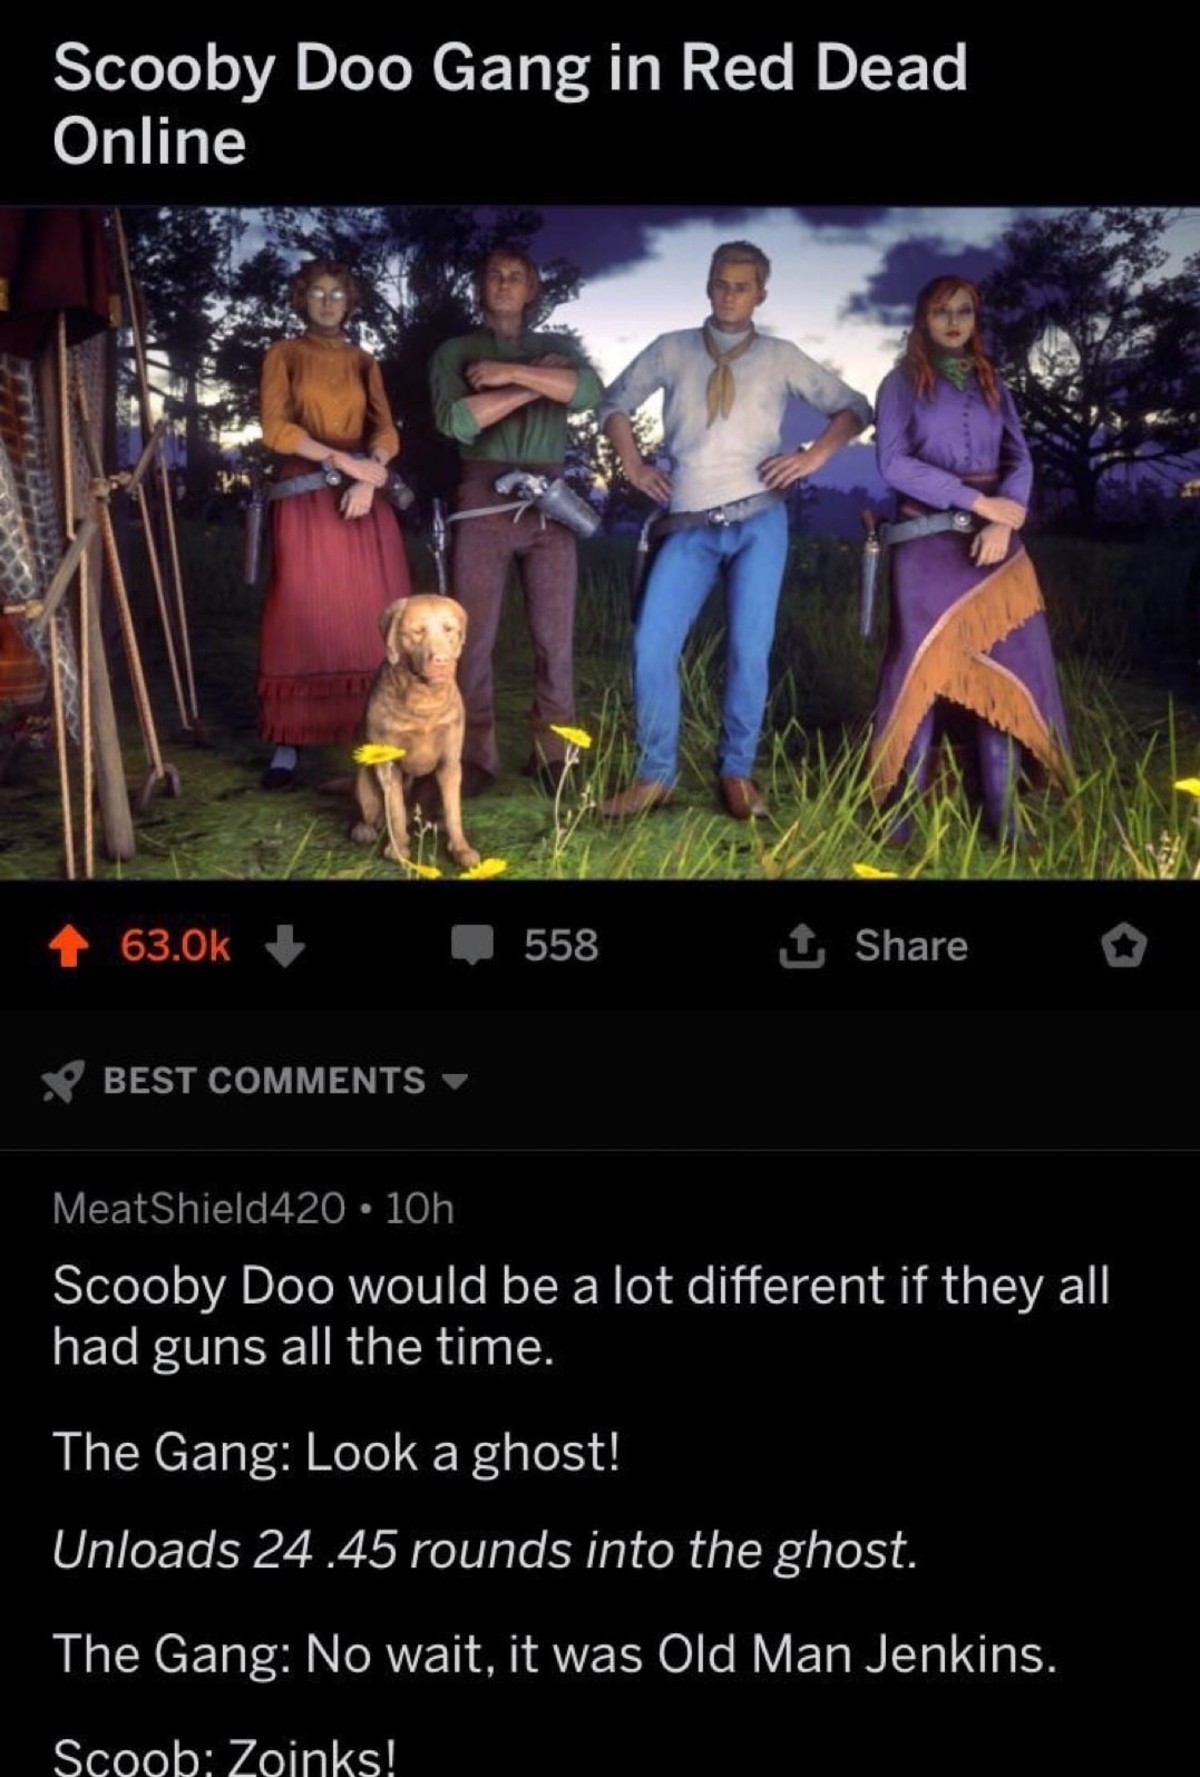 photo caption - Scooby Doo Gang in Red Dead Online 558 Best MeatShield420 10h Scooby Doo would be a lot different if they all had guns all the time. The Gang Look a ghost! Unloads 24.45 rounds into the ghost. The Gang No wait, it was Old Man Jenkins. Scoo